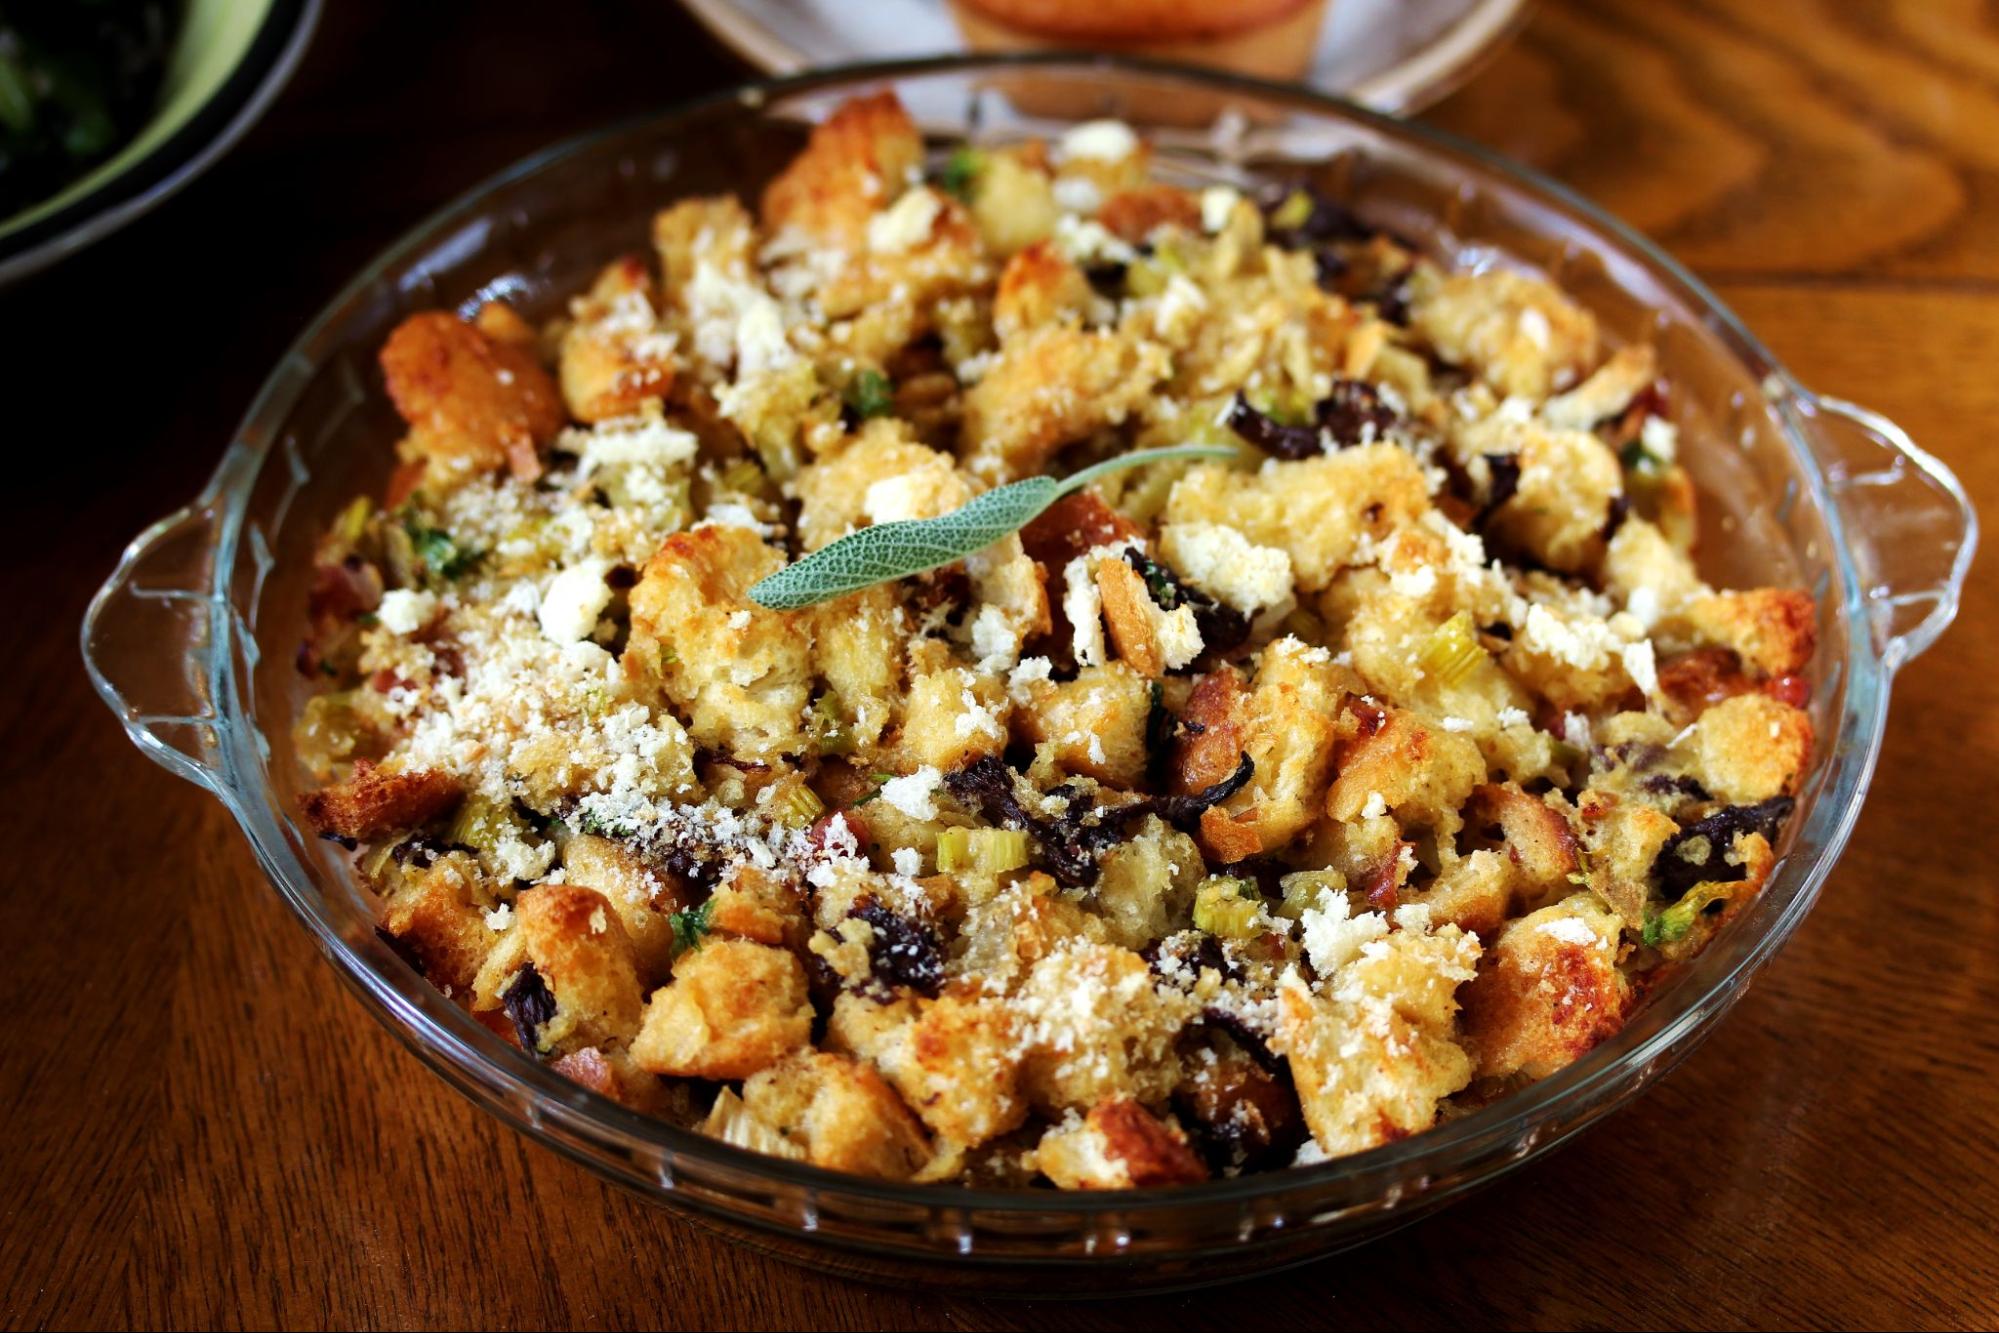 Mushroom cornbread stuffing is a delicious addition to any holiday meal.